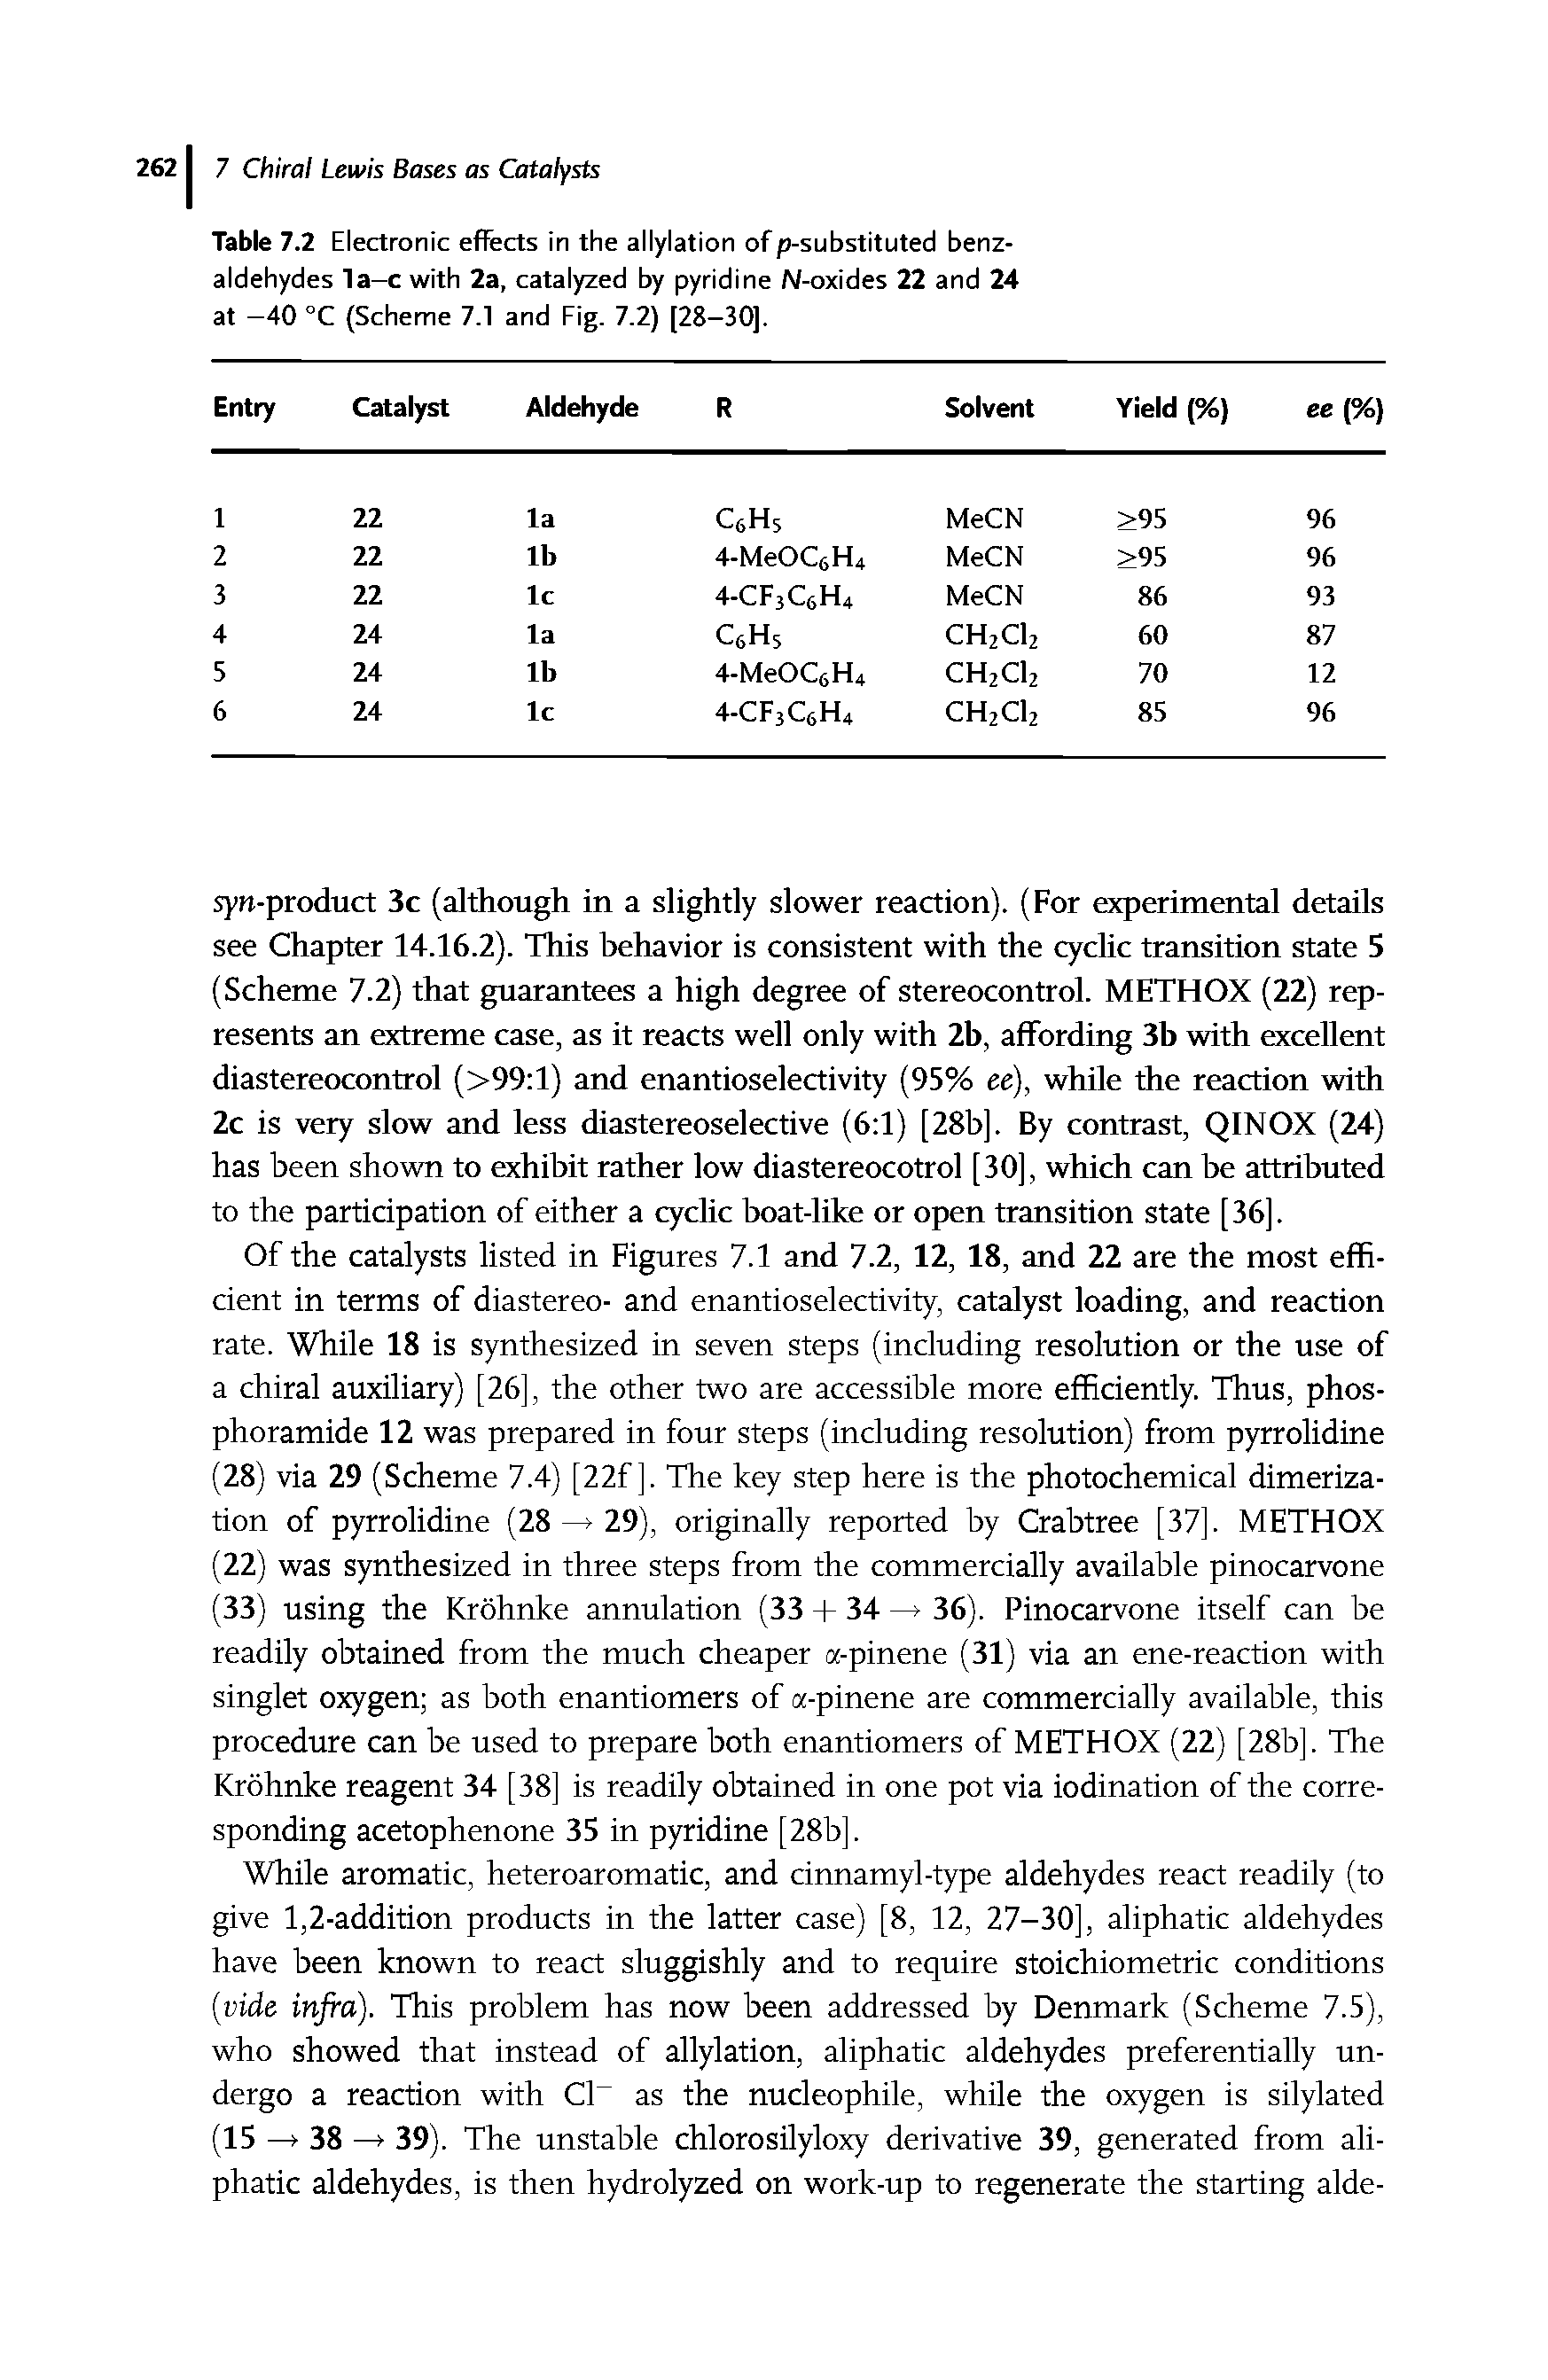 Table 7.2 Electronic effects in the allylation of p-substituted benz-aldehydes la-c with 2a, catalyzed by pyridine N-oxides 22 and 24 at -40 °C (Scheme 7.1 and Fig. 7.2) [28-30].